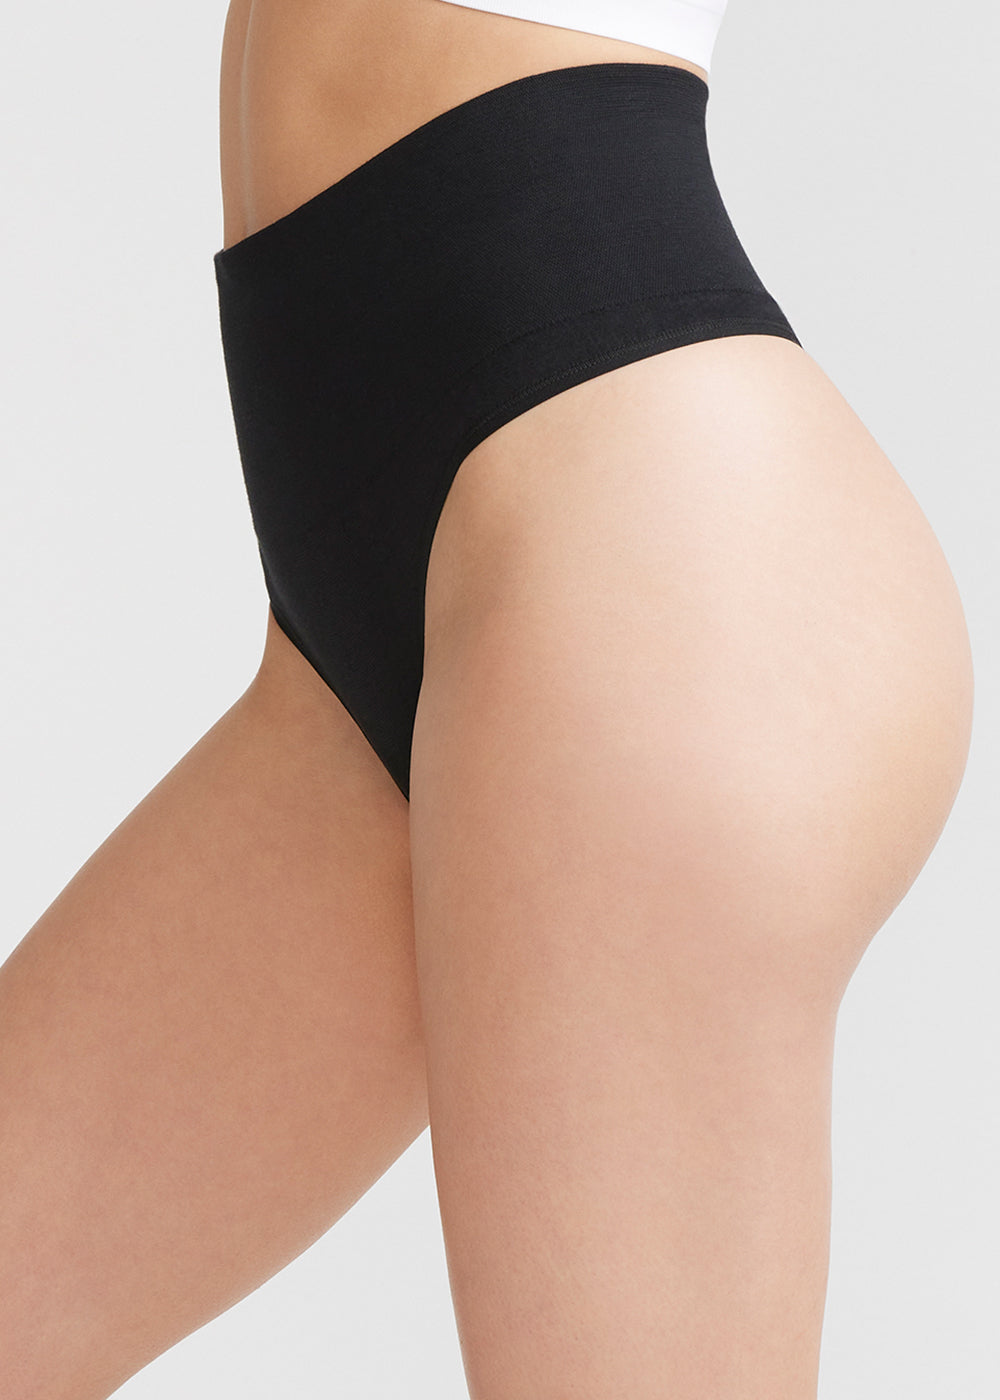 Alex Cotton Shaping Thong - Seamless from Yummie in Black  - 1